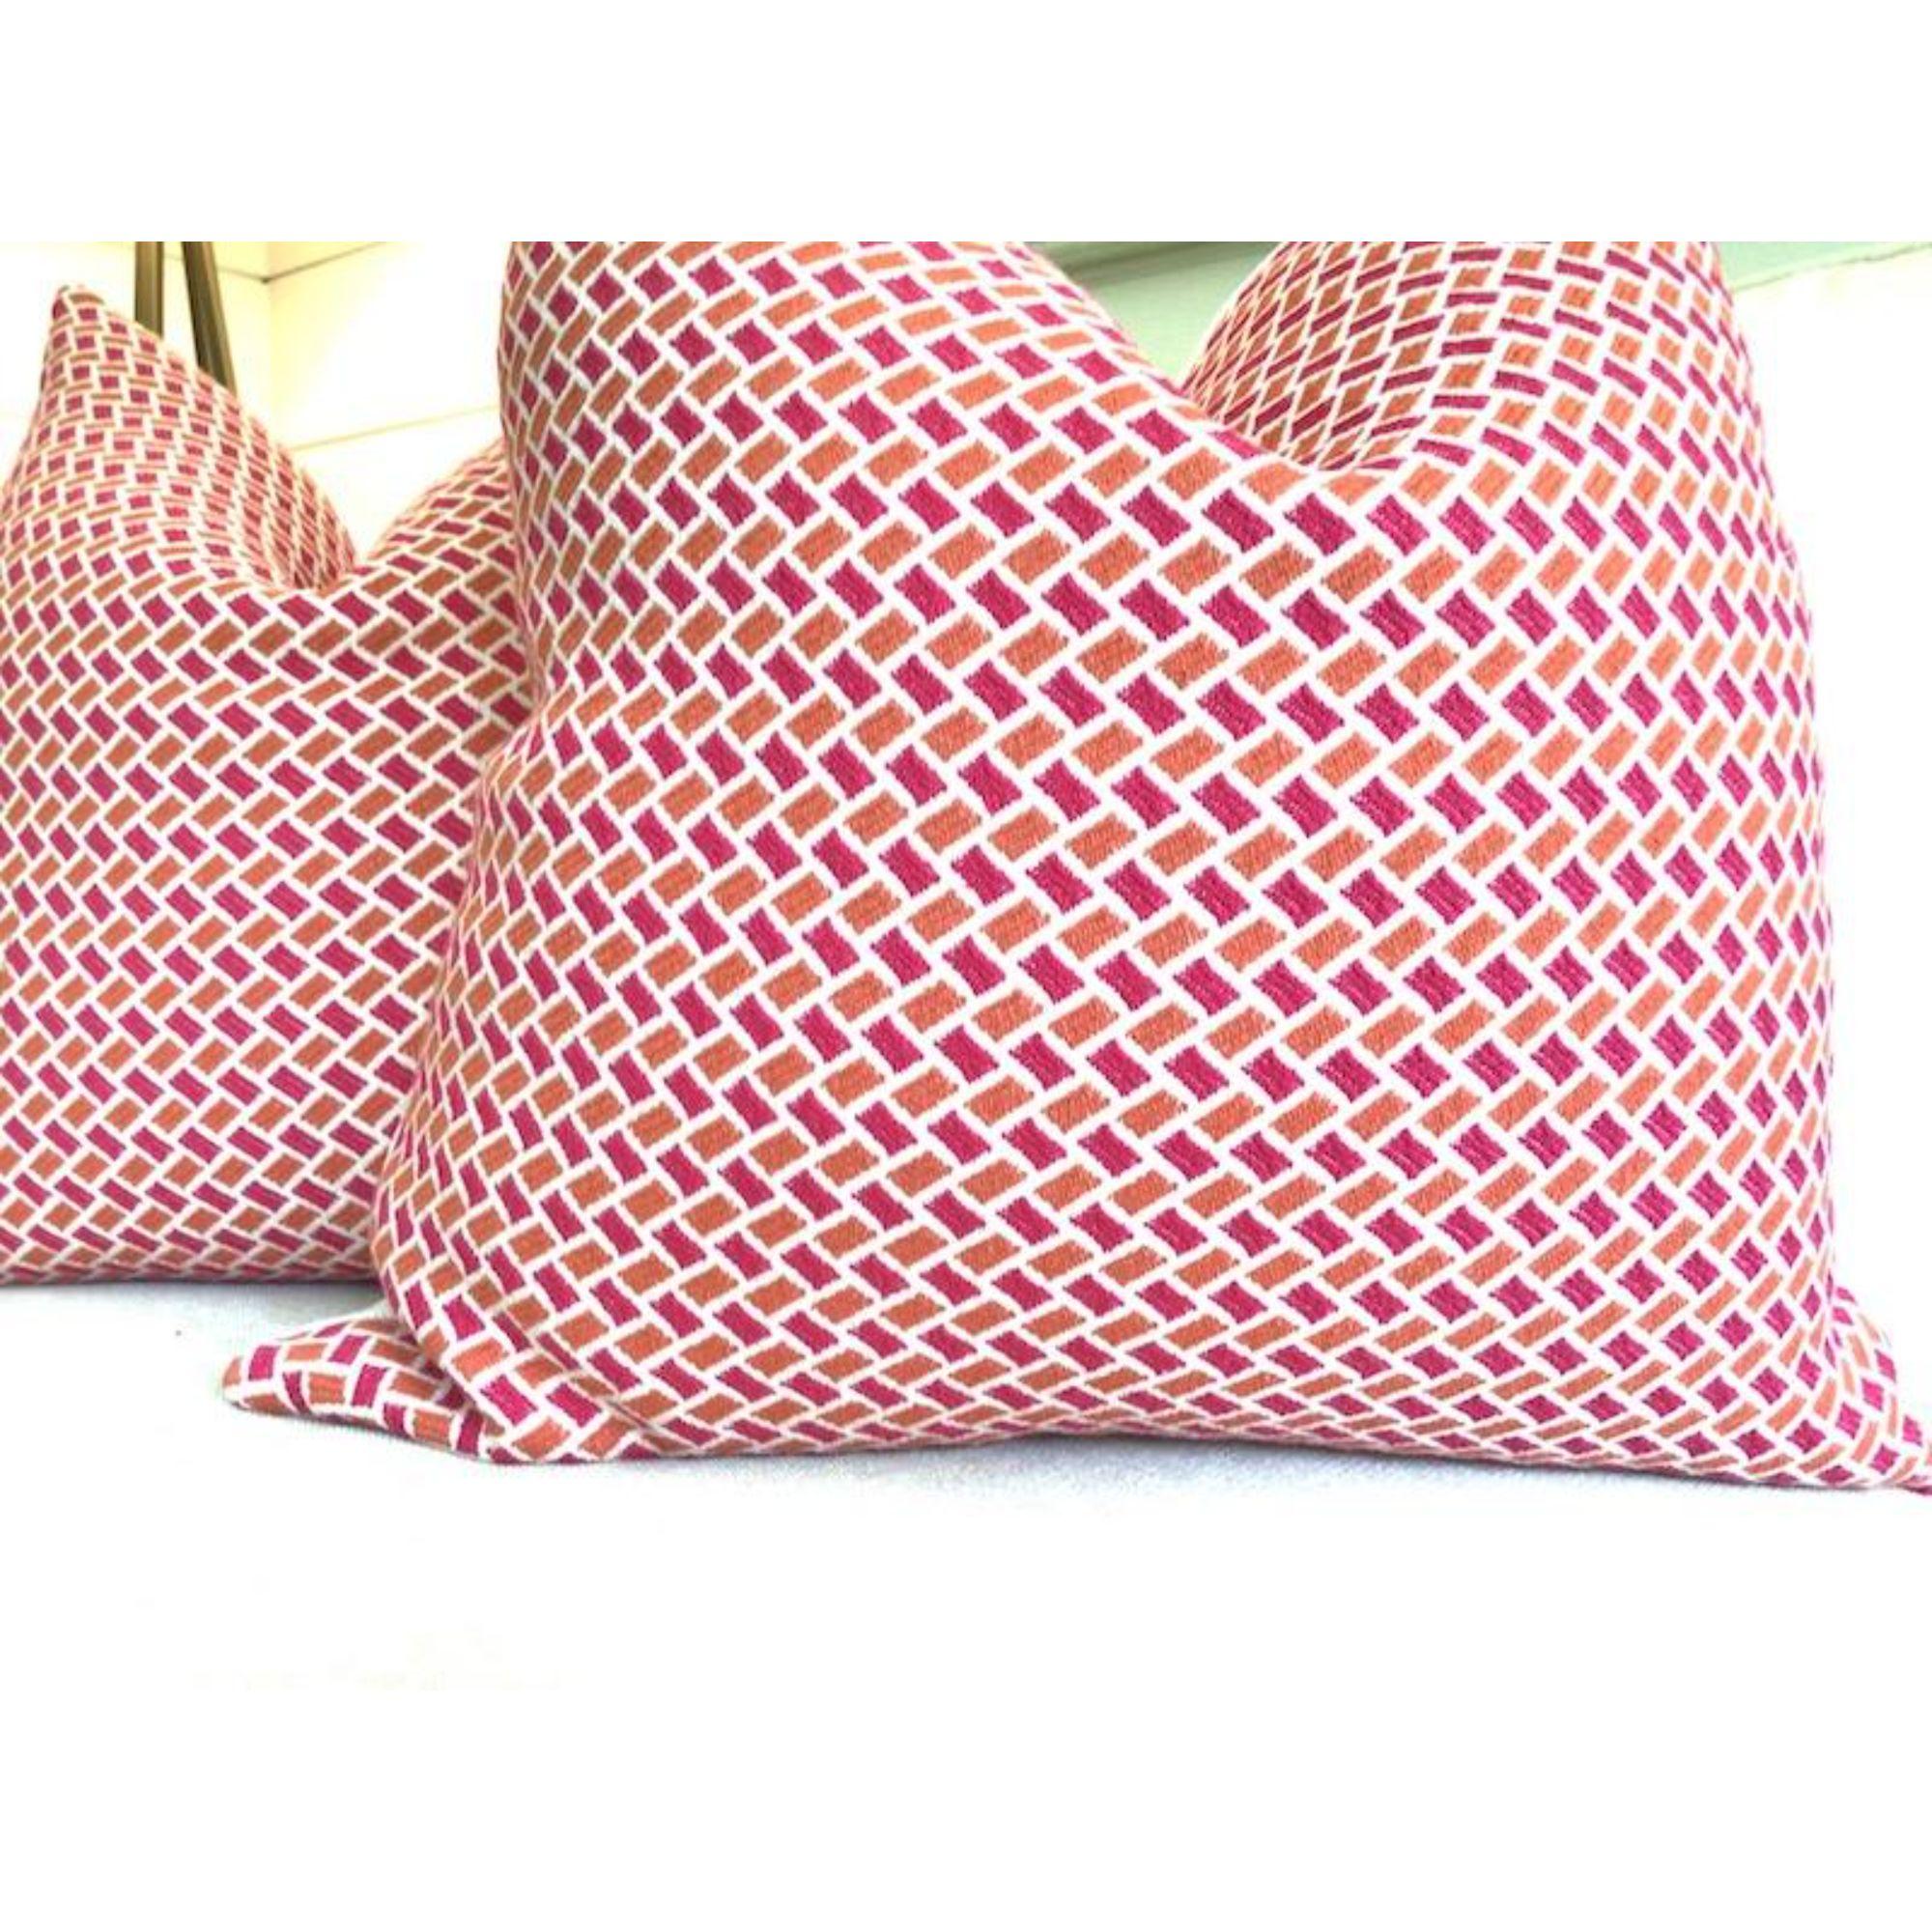 Brunschwig & Fils “Briquetage” in Hot Pink & Coral Orange Pillows - a Pair In New Condition For Sale In Winder, GA